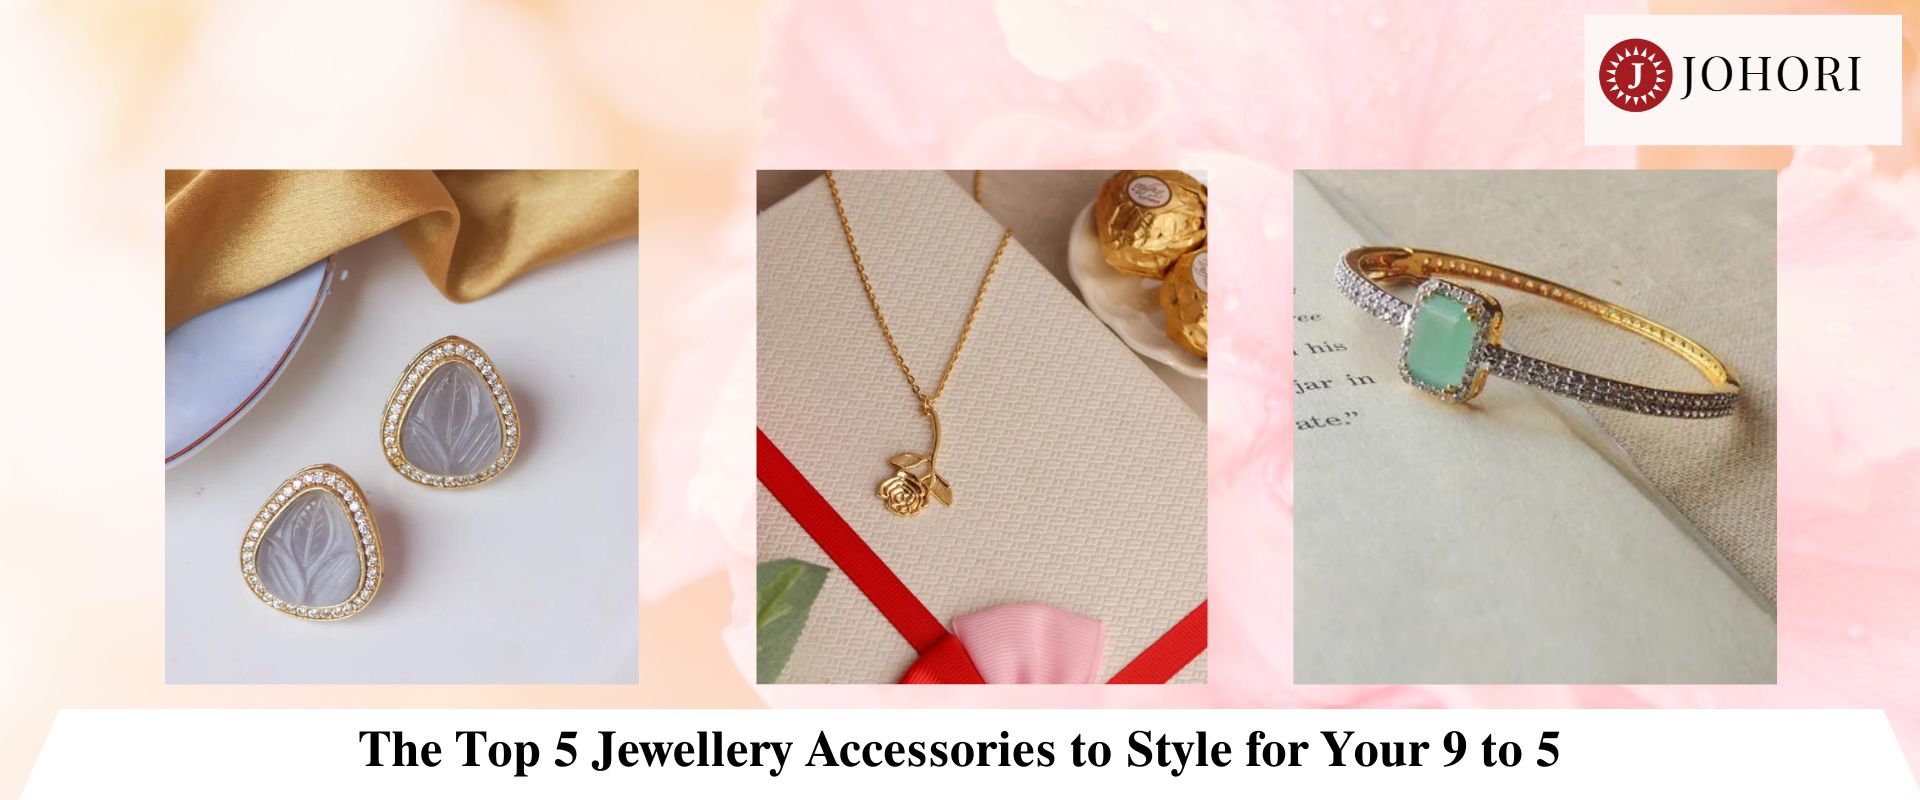 The Top 5 Jewellery Accessories to Style for Your 9 to 5